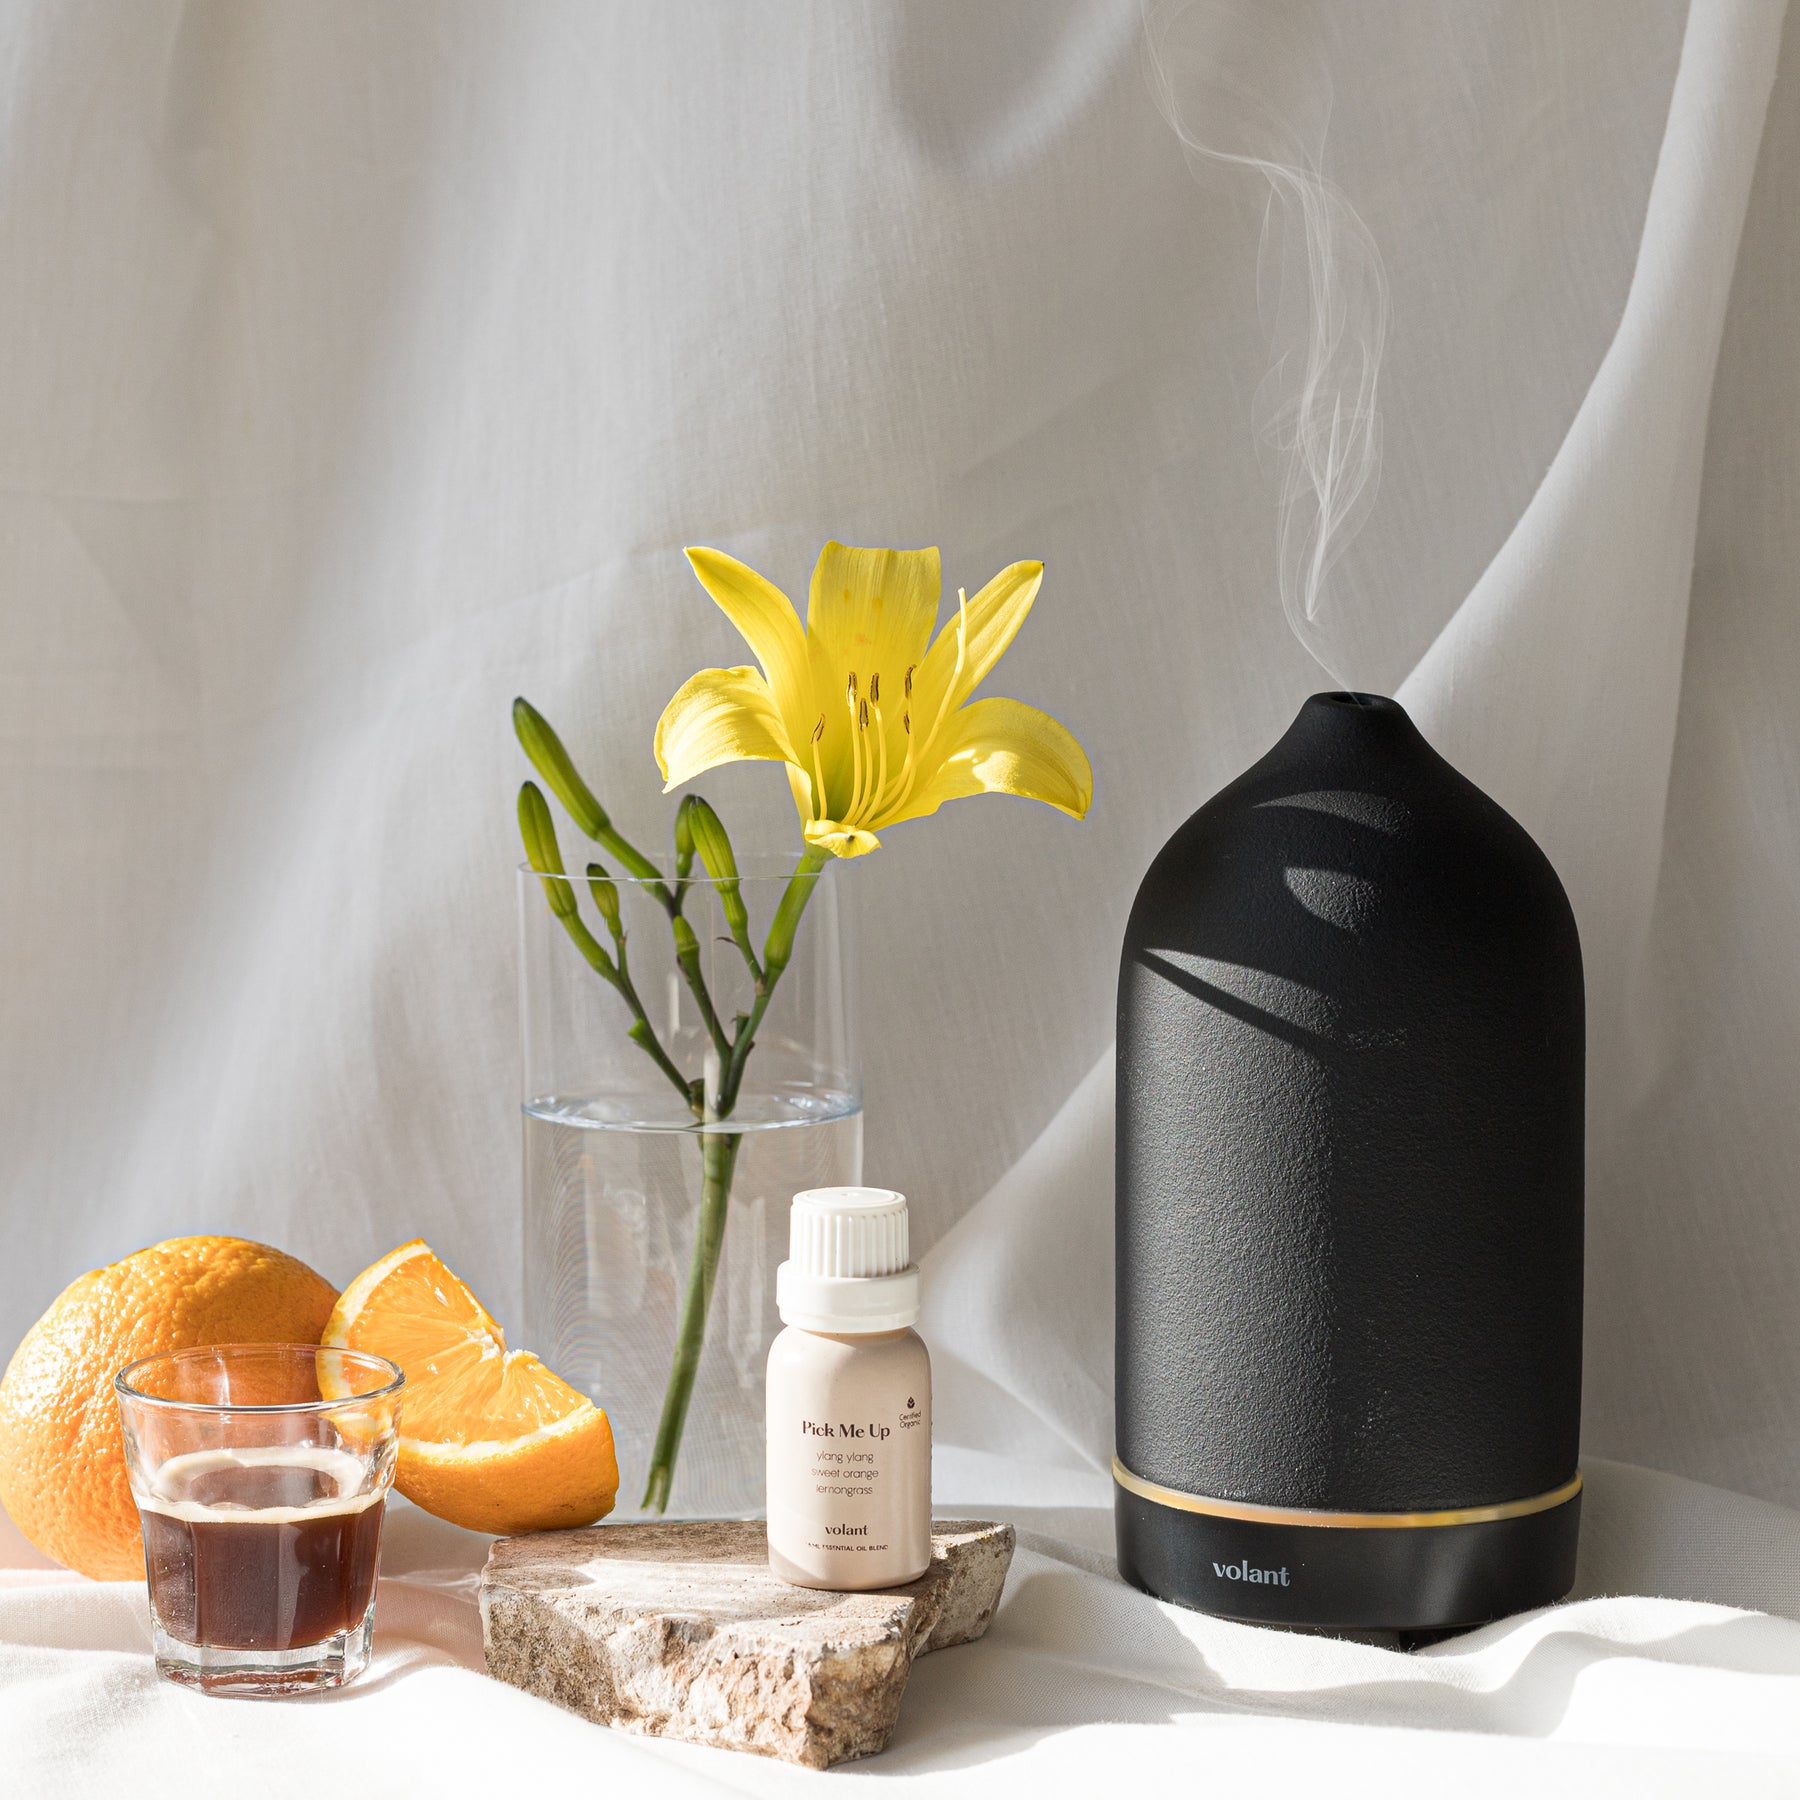 volant black diffuser using pick me up essential oil blend made with pure Sweet Orange, Lemongrass, and Ylang Ylang